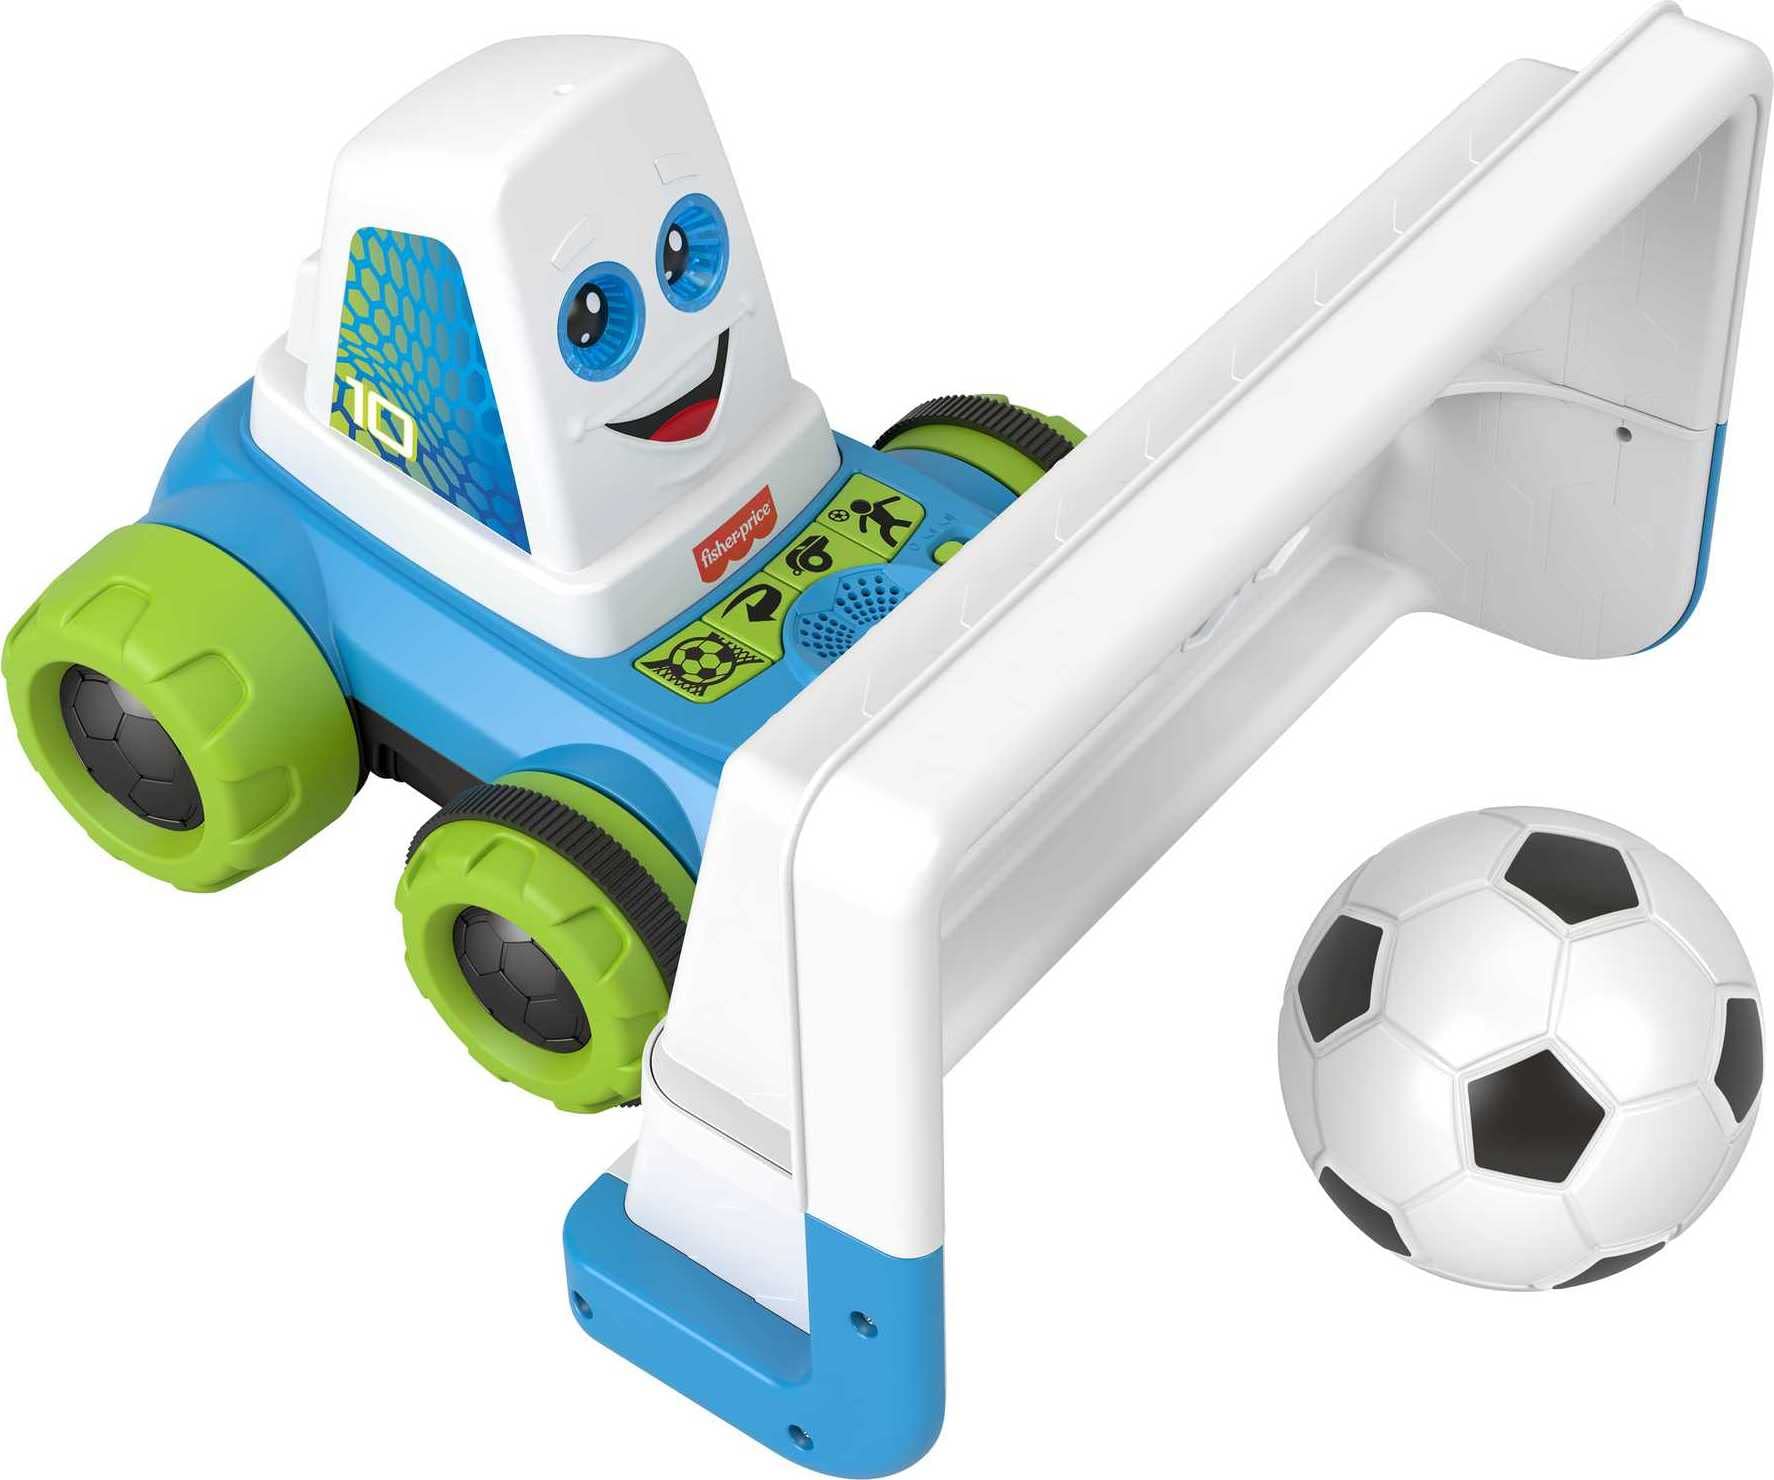 Fisher-Price Goaldozer Motorized Electronic Soccer Game Net w/ Lights & Sounds $21.19 or Less + Free Shipping w/ Prime or on orders $35+